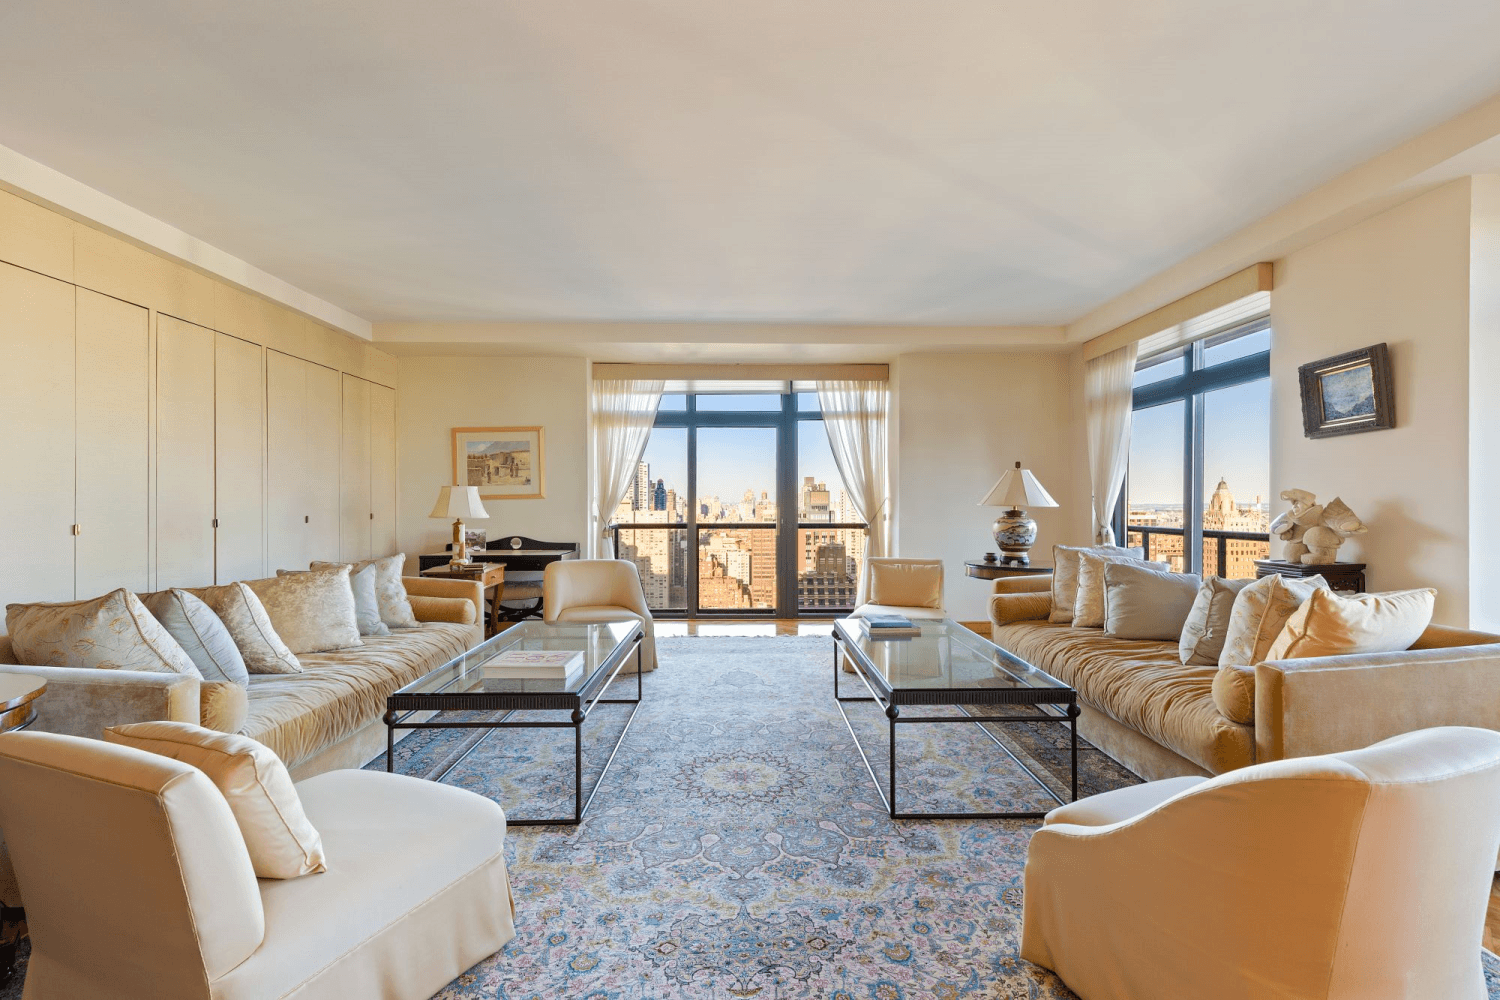 Presenting a newly listed, meticulously designed residence on the 38th floor of 100 United Nations Plaza, this sophisticated property boasts seven rooms in total, including 4 bedrooms, 3.